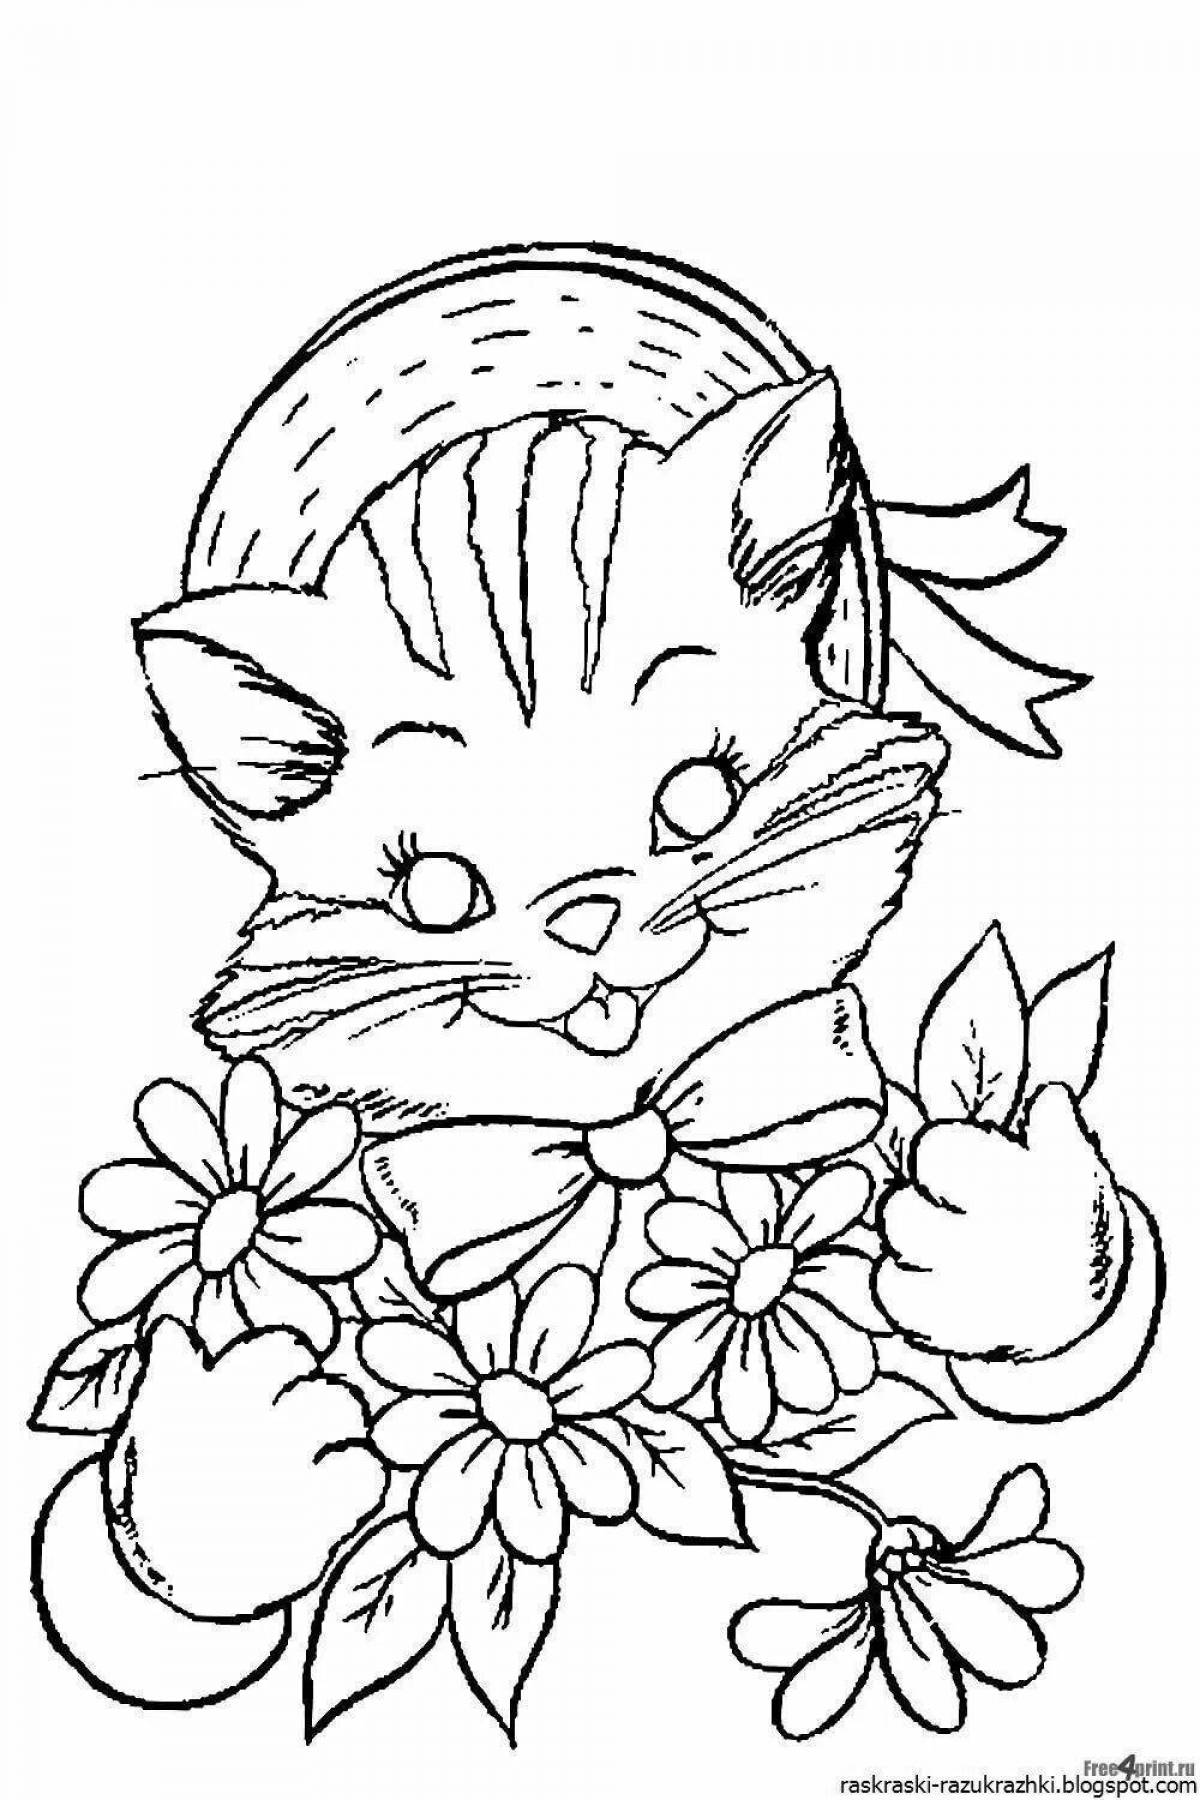 Jolly cat with flowers